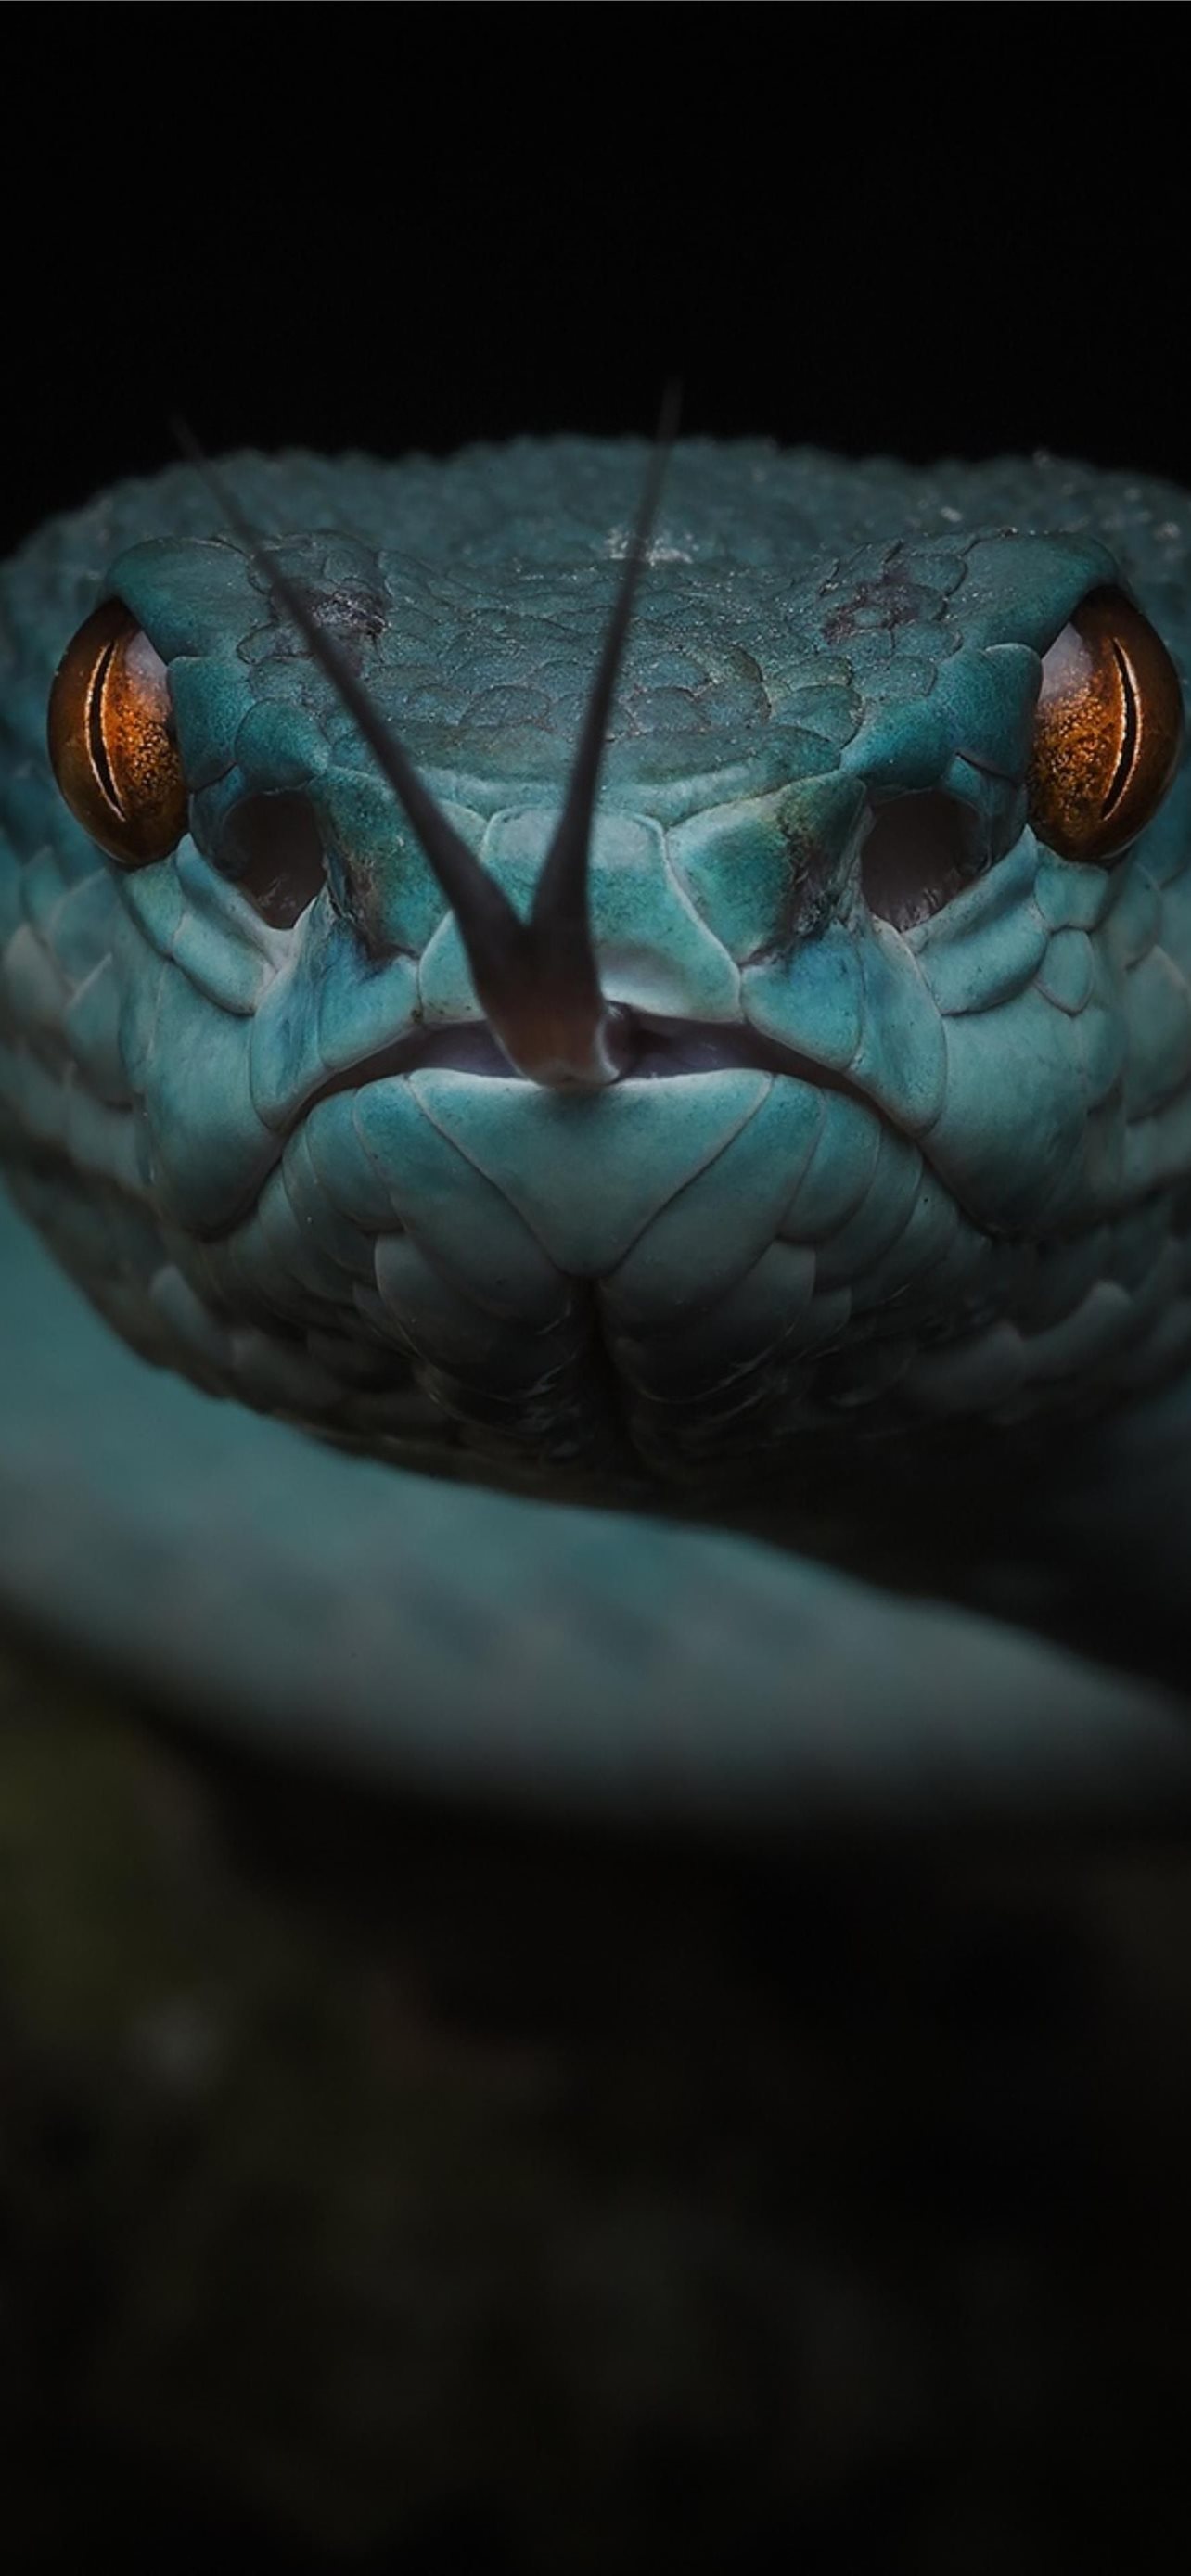 At first I confused the snake's nose and eyes iPhone Wallpapers Free  Download